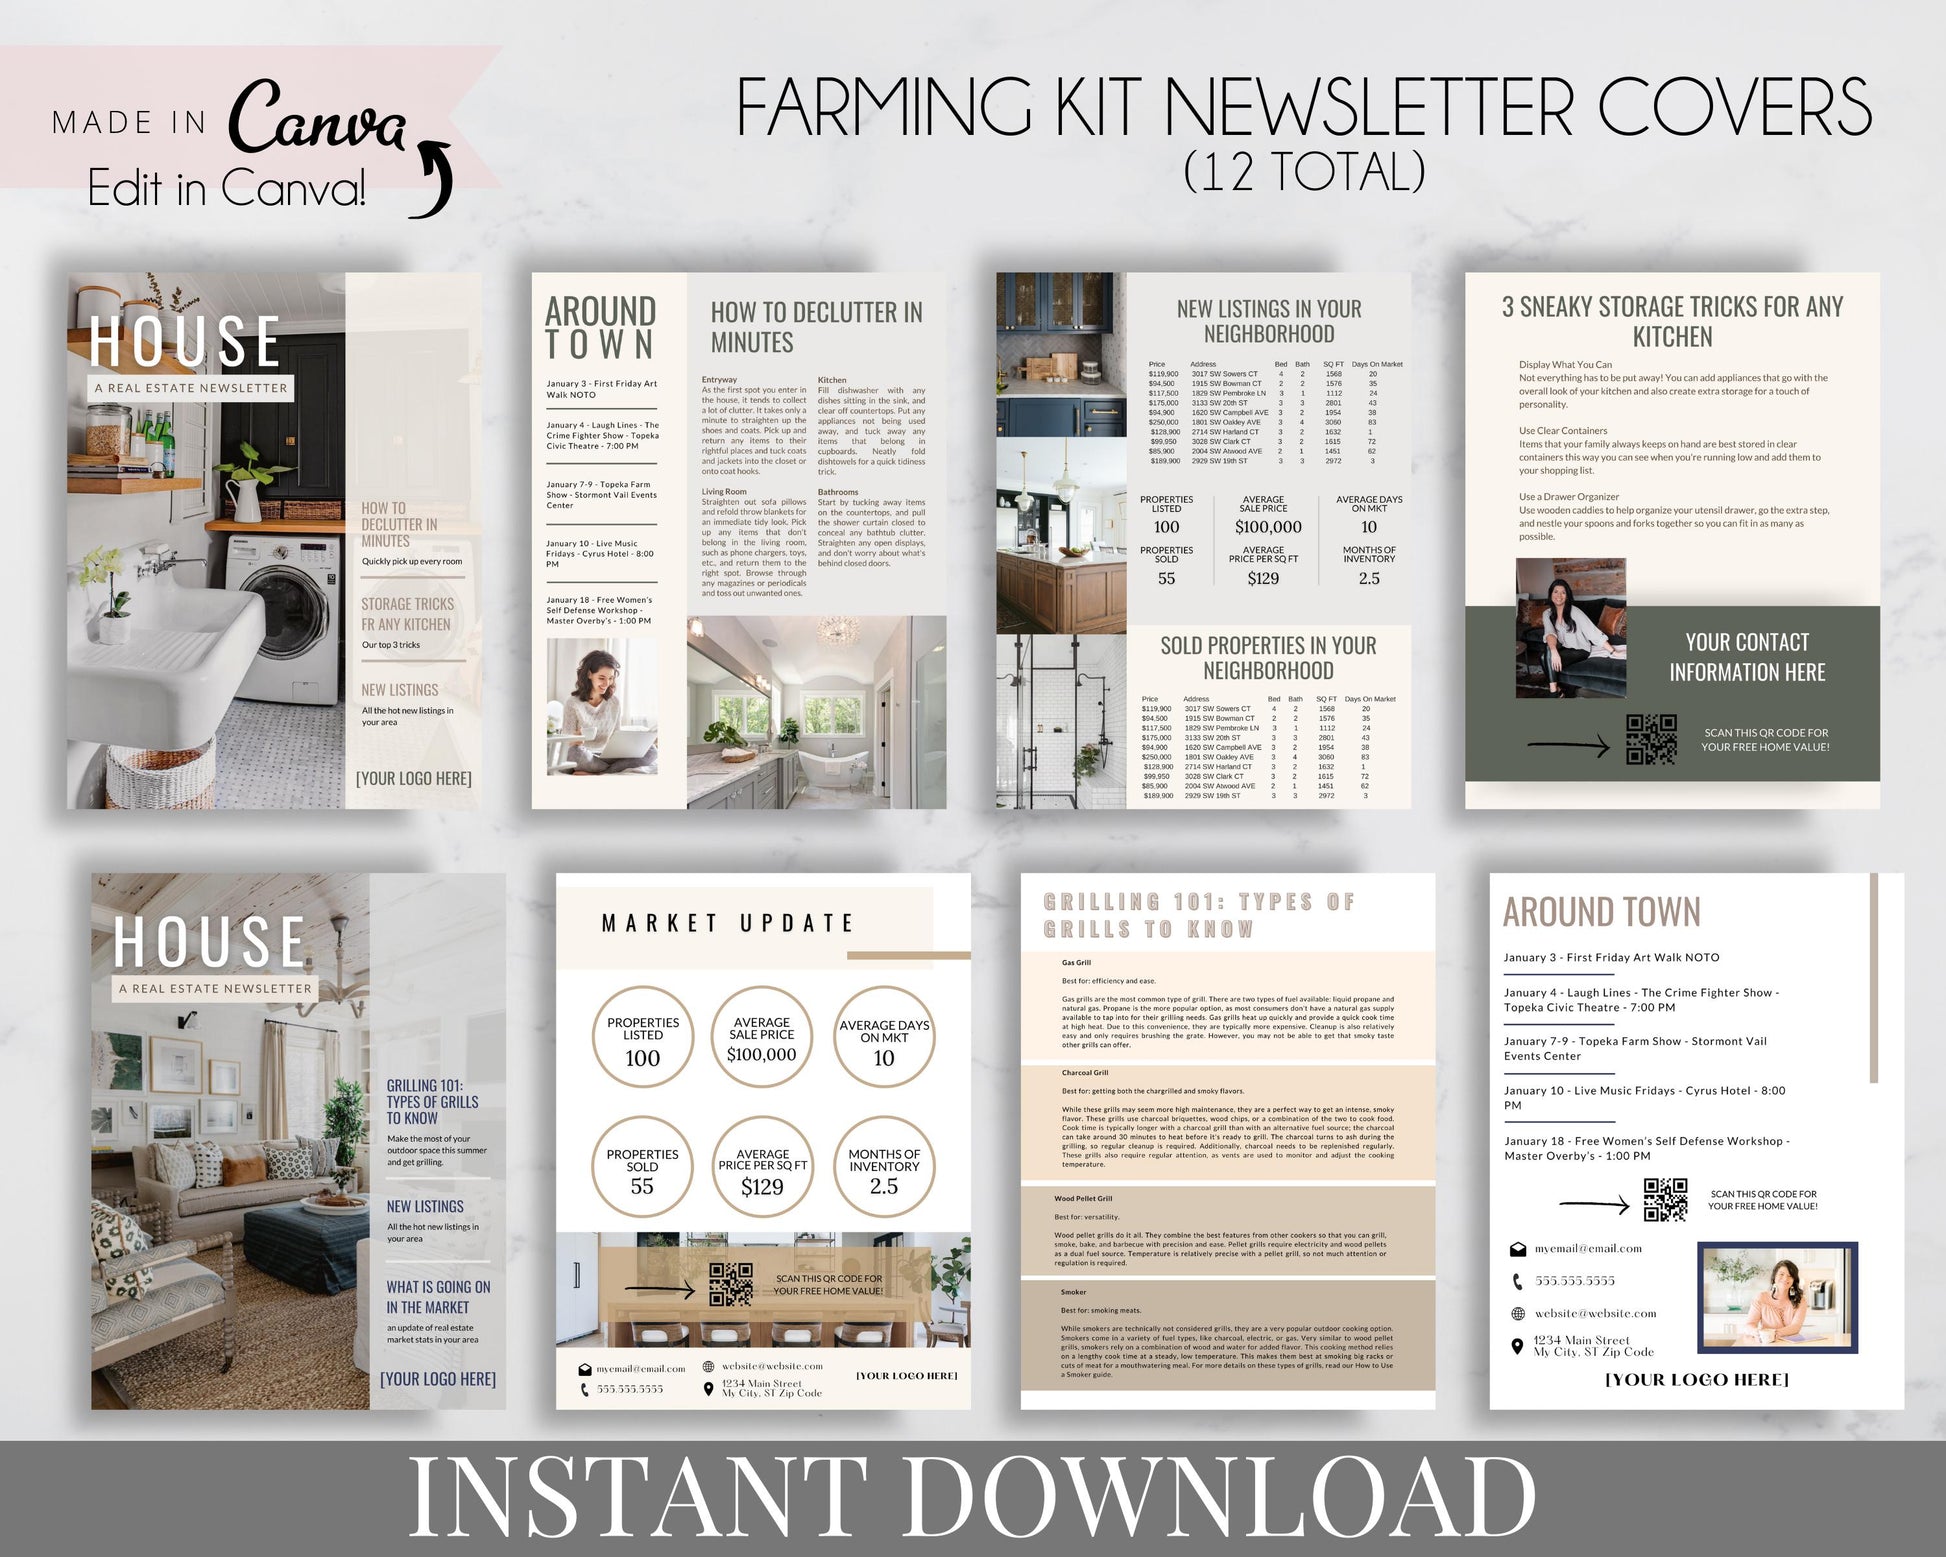 Real Estate Farming Kit Marketing for Realtors, Agents - Instant Download - Newsletter Templates Made in Canva